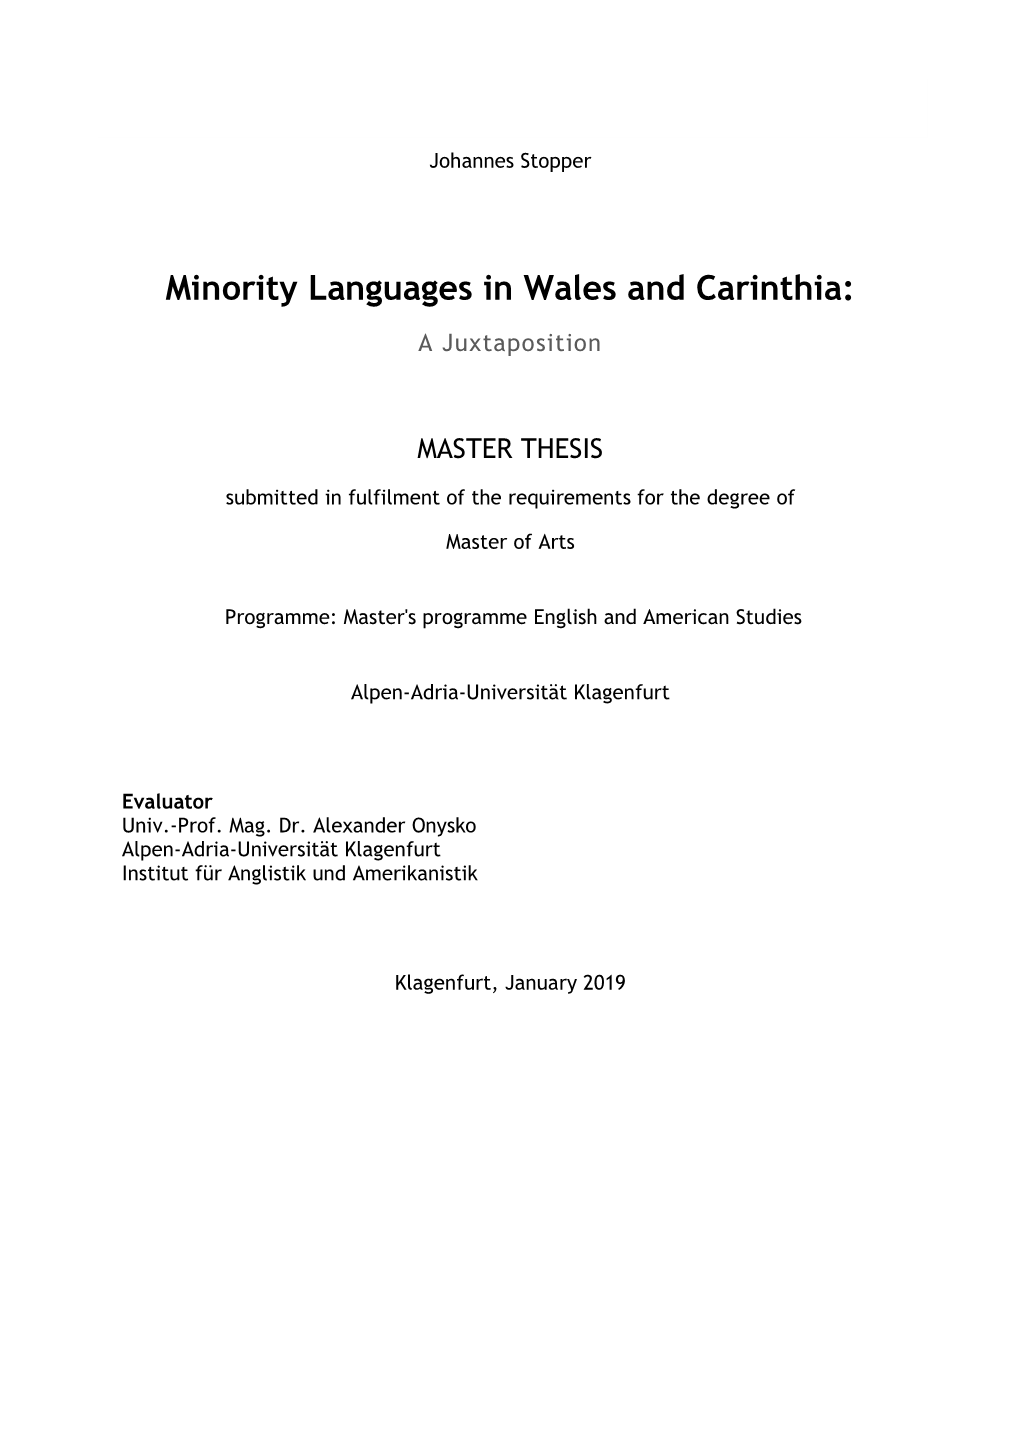 Minority Languages in Wales and Carinthia